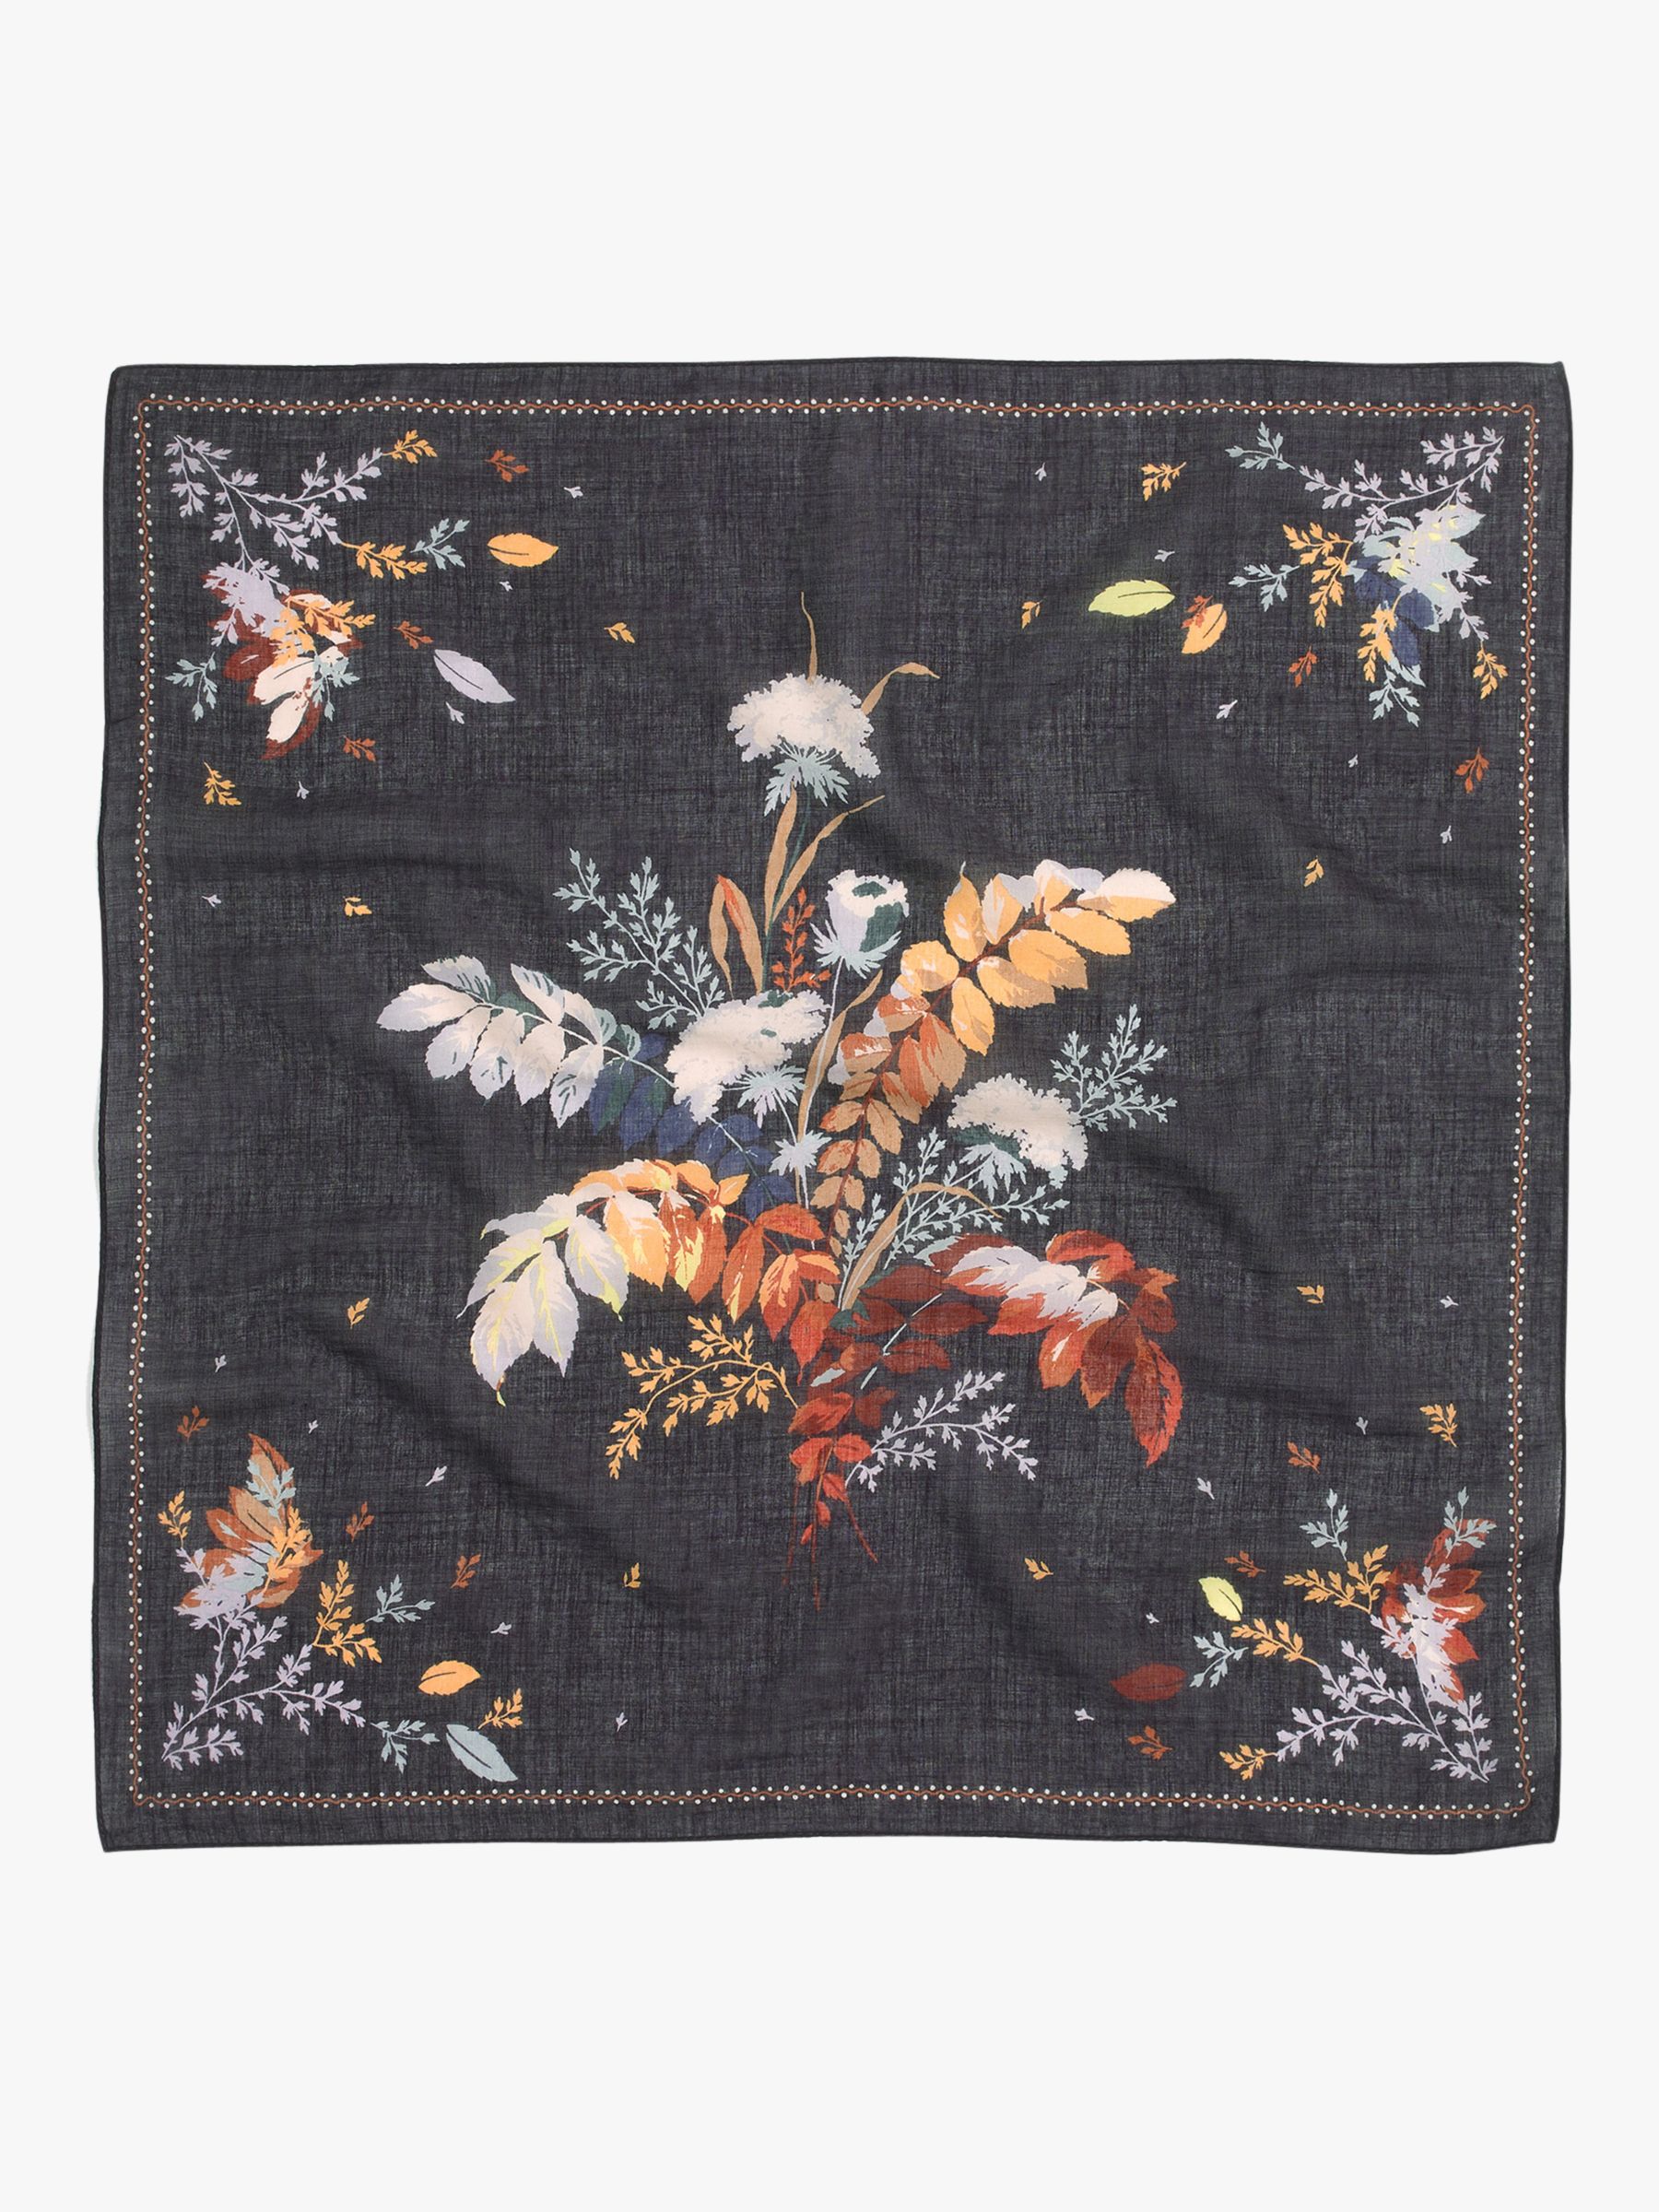 Madewell Washed Cotton Floral Print Bandana, Black/Multi, One Size